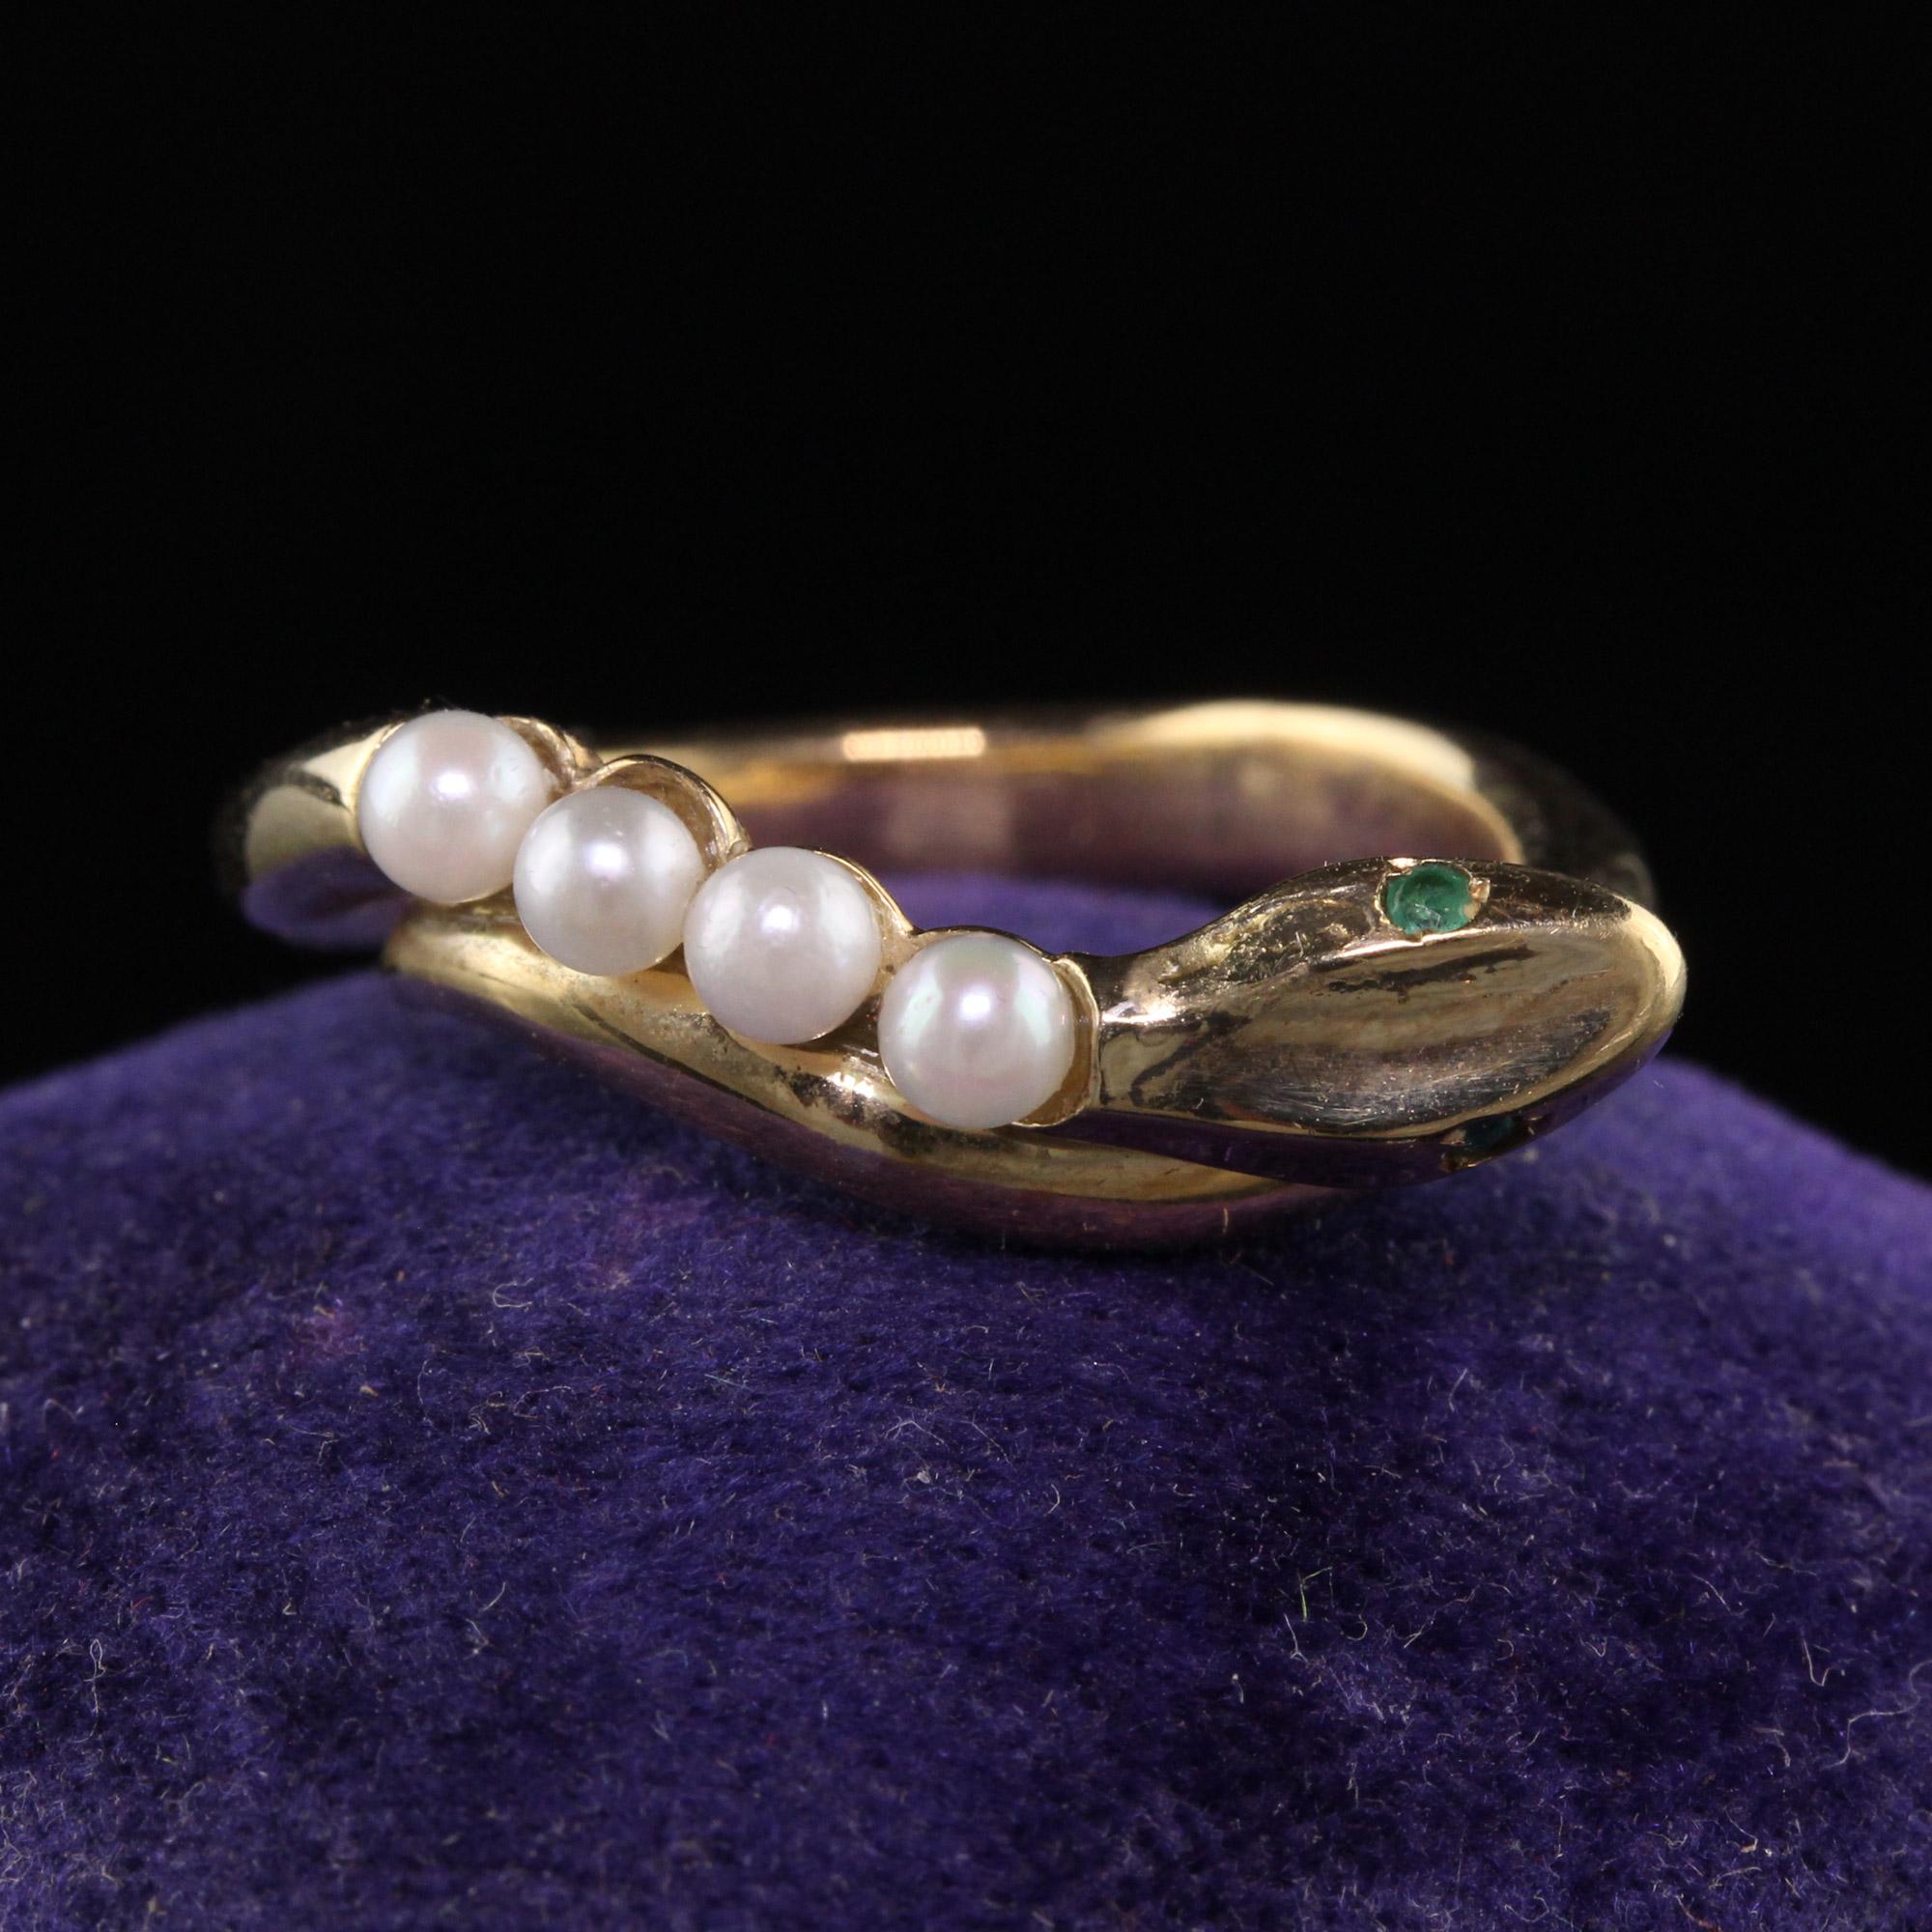 Beautiful Retro Estate 14K Yellow Gold Pearl and Emerald Snake Ring. This beautiful ring is crafted in 14k yellow gold. There are four round pearls on the back of the snake and has two emerald eyes. It is in great condition.

Item #R1329

Metal: 14K